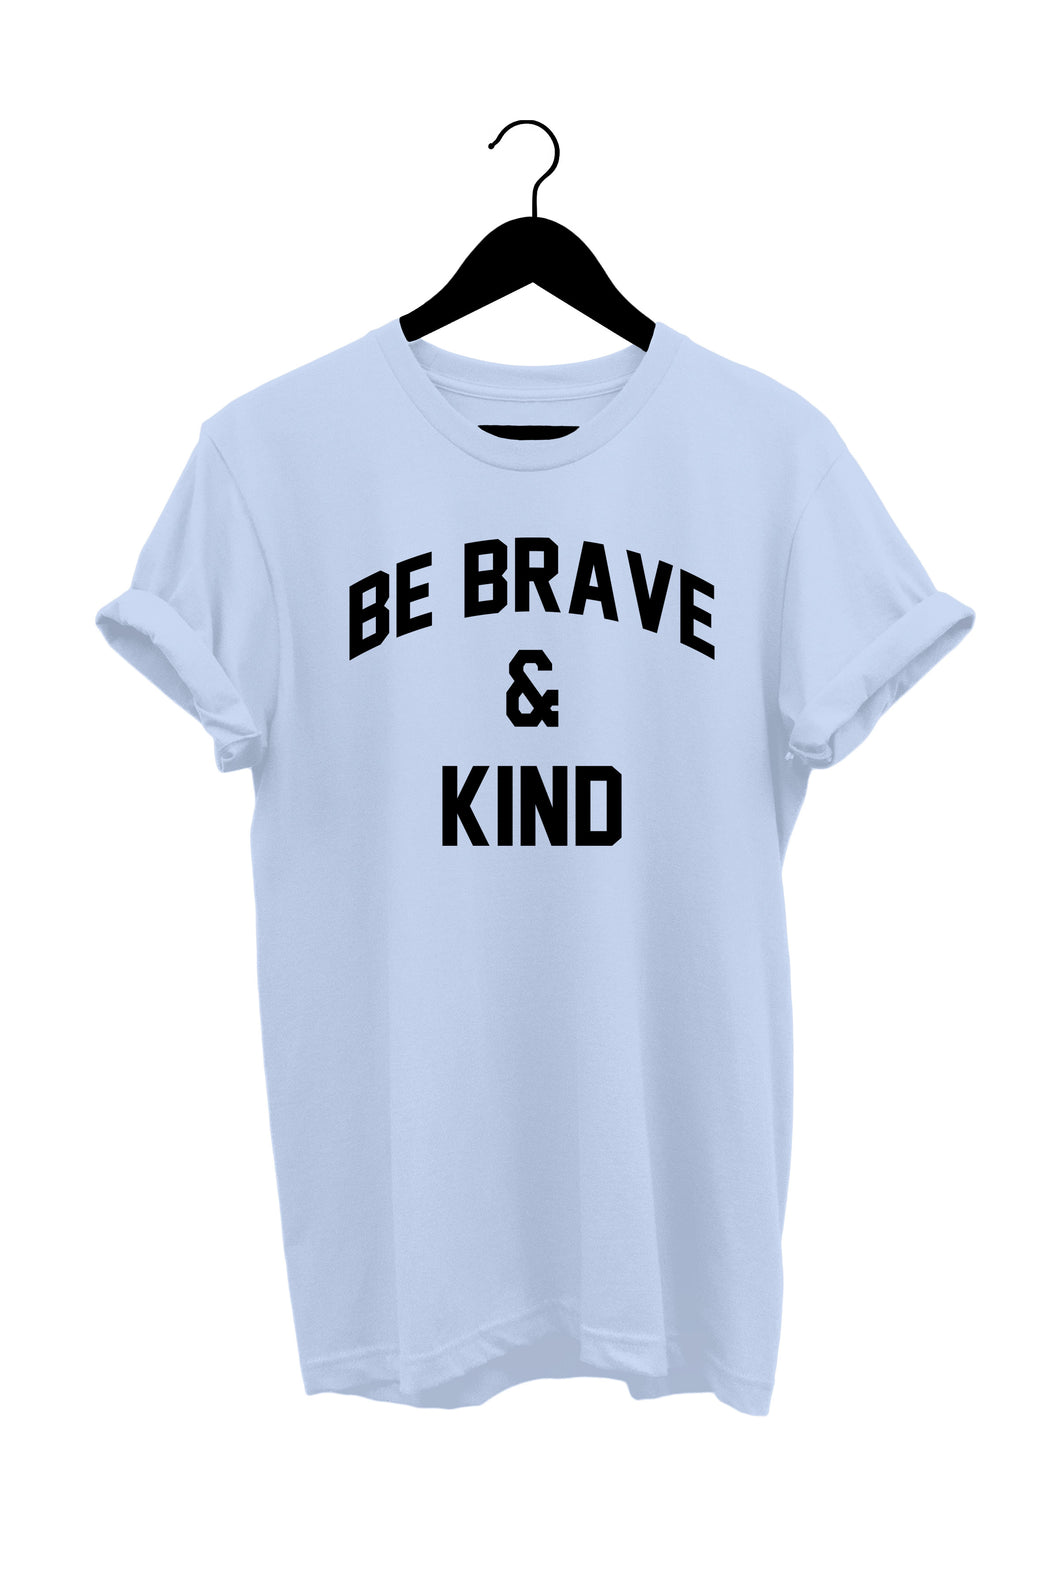 ”Be Brave & Kind” GRAPHIC T-SHIRT